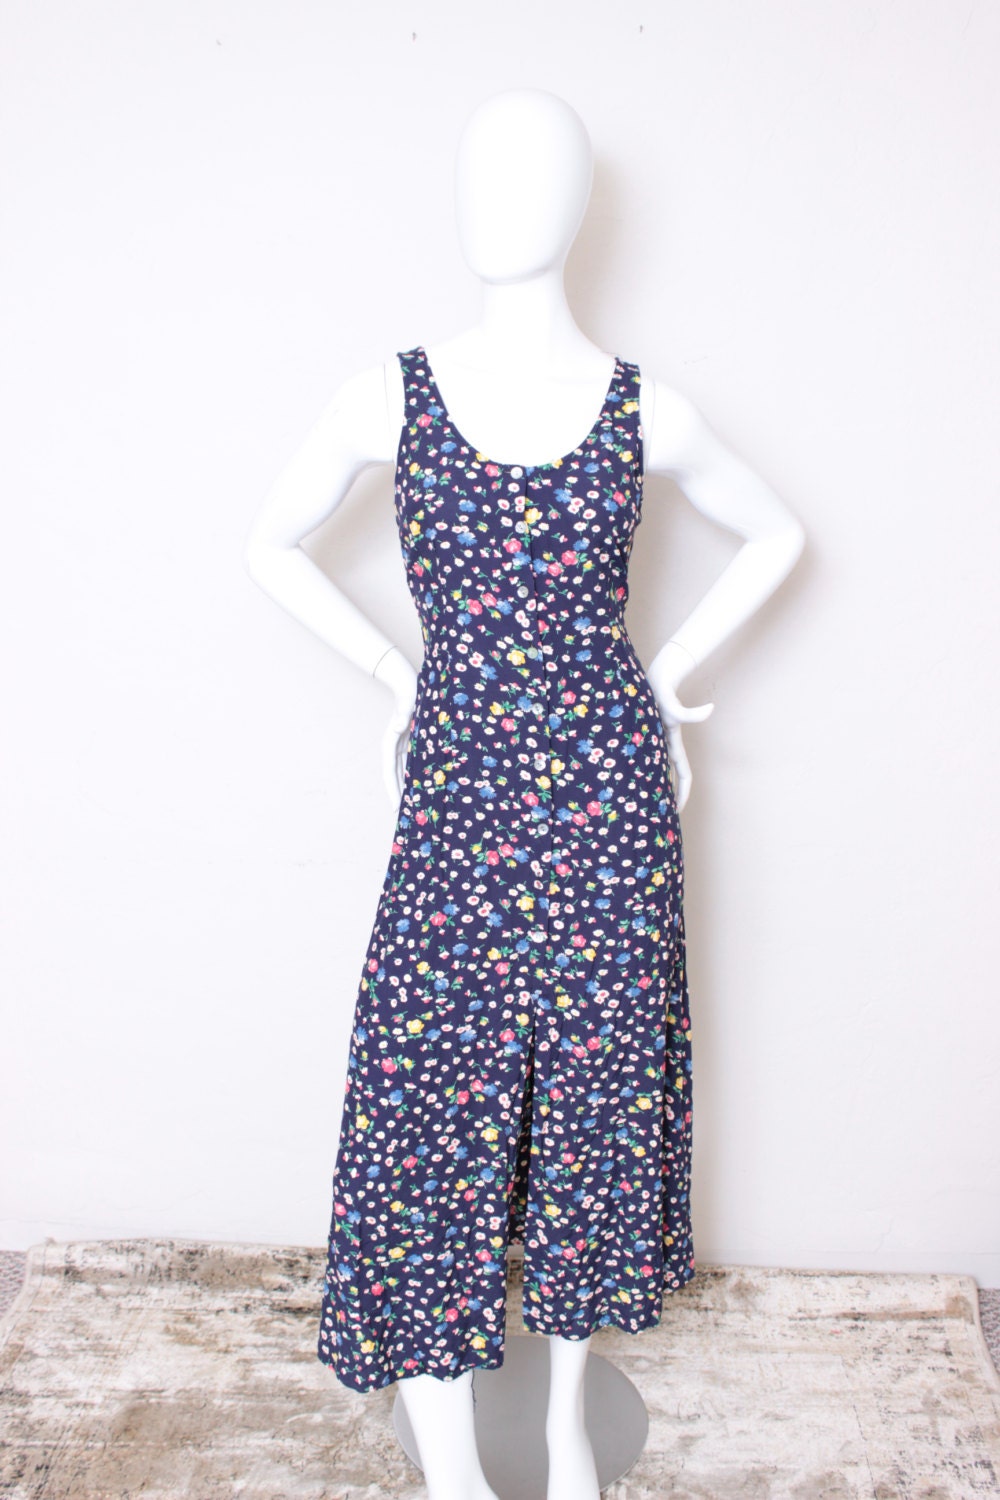 Vintage Navy Blue Floral Dress with Buttons Up the by thejunkhaus